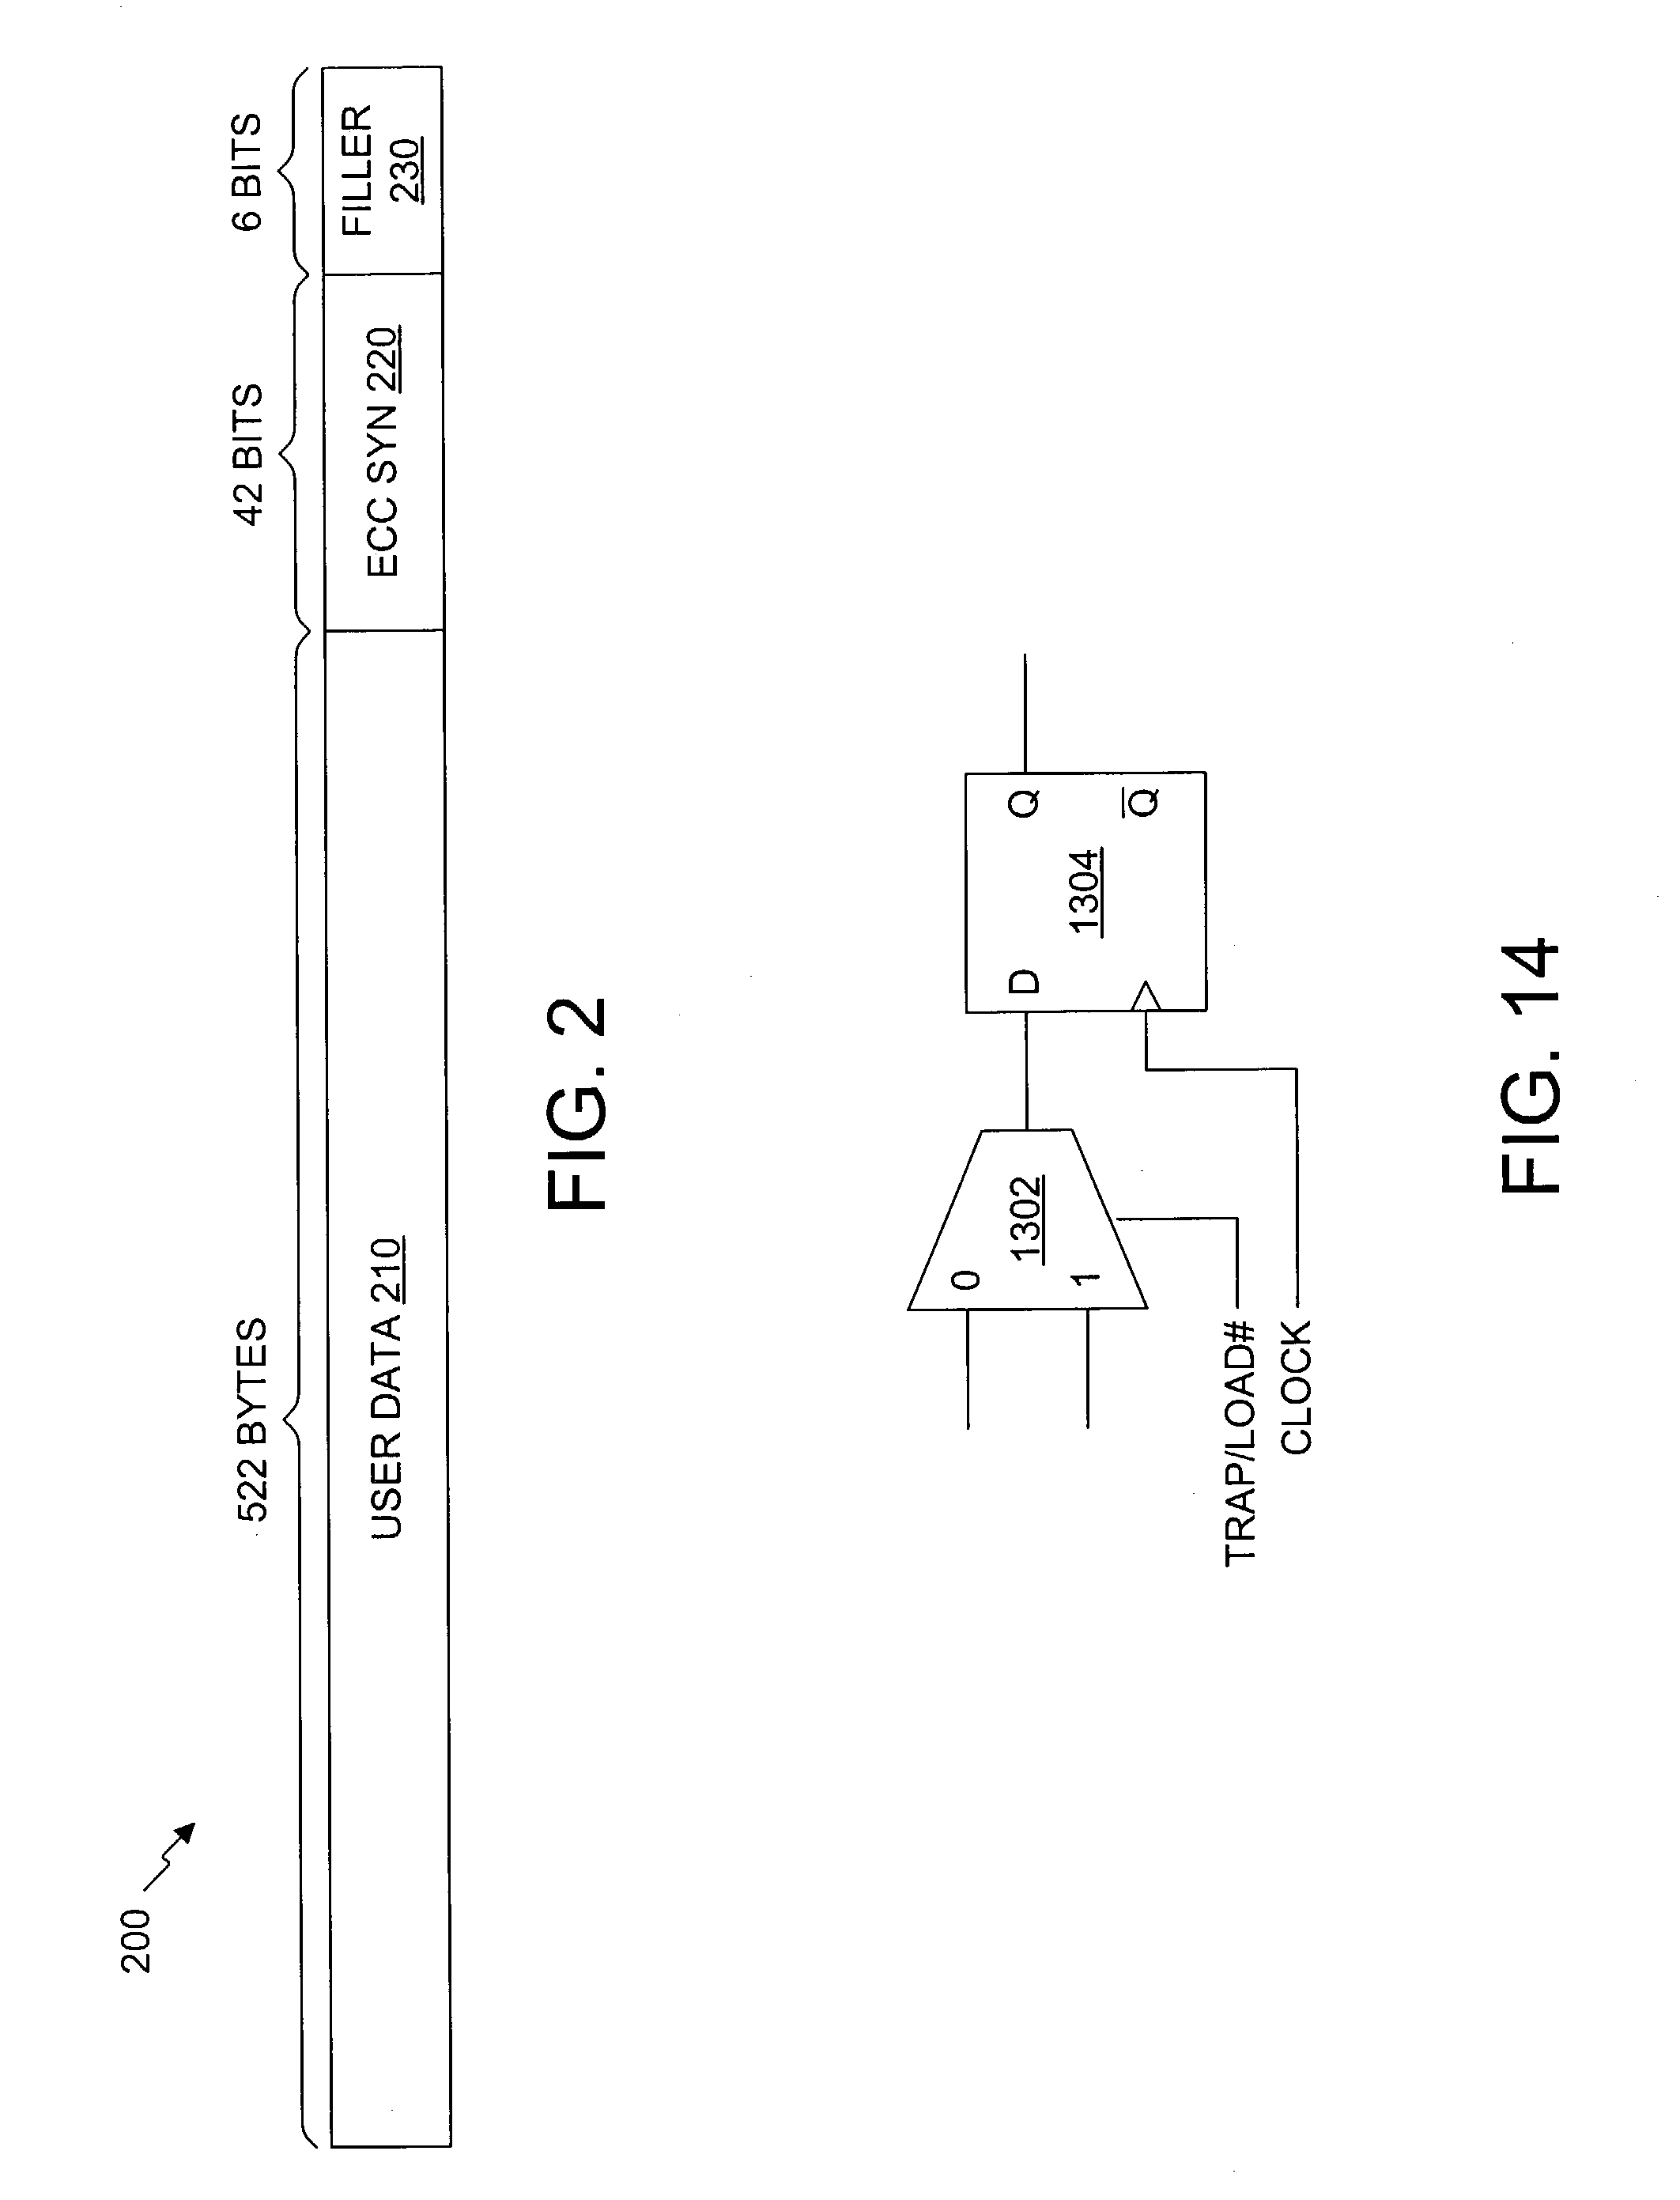 Serial flash integrated circuit having error detection and correction